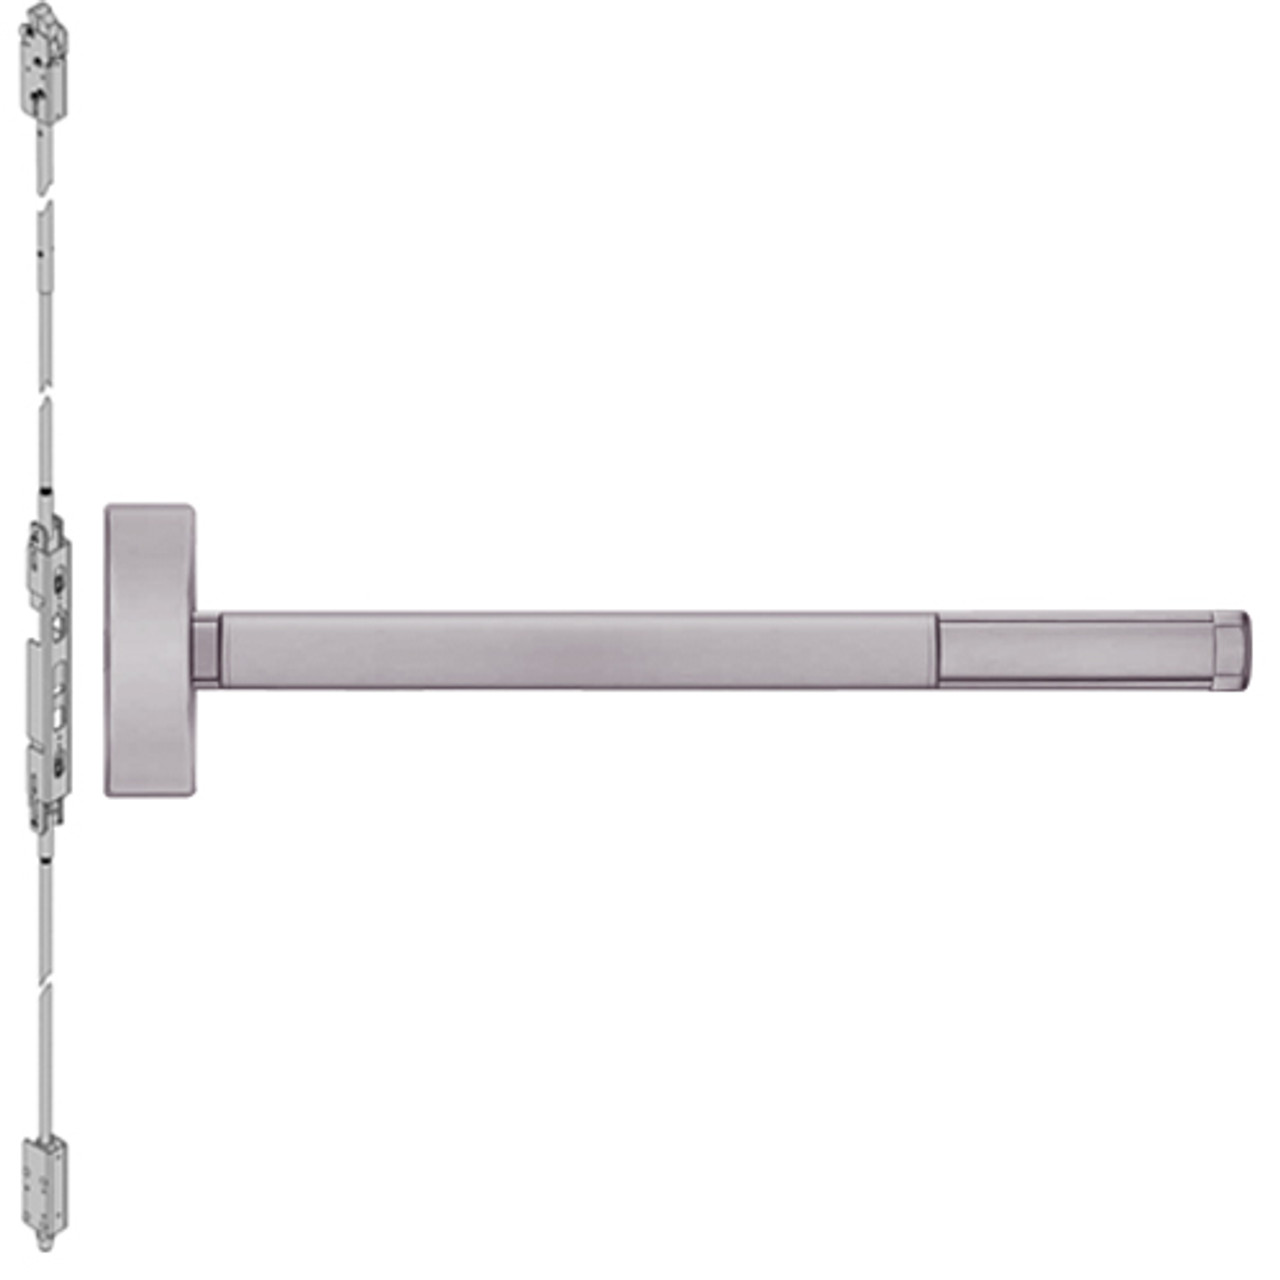 TSFL2803LBR-630-36 PHI 2800 Series Fire Rated Concealed Vertical Rod Exit Device with Touchbar Monitoring Switch Prepped for Key Retracts Latchbolt in Satin Stainless Steel Finish